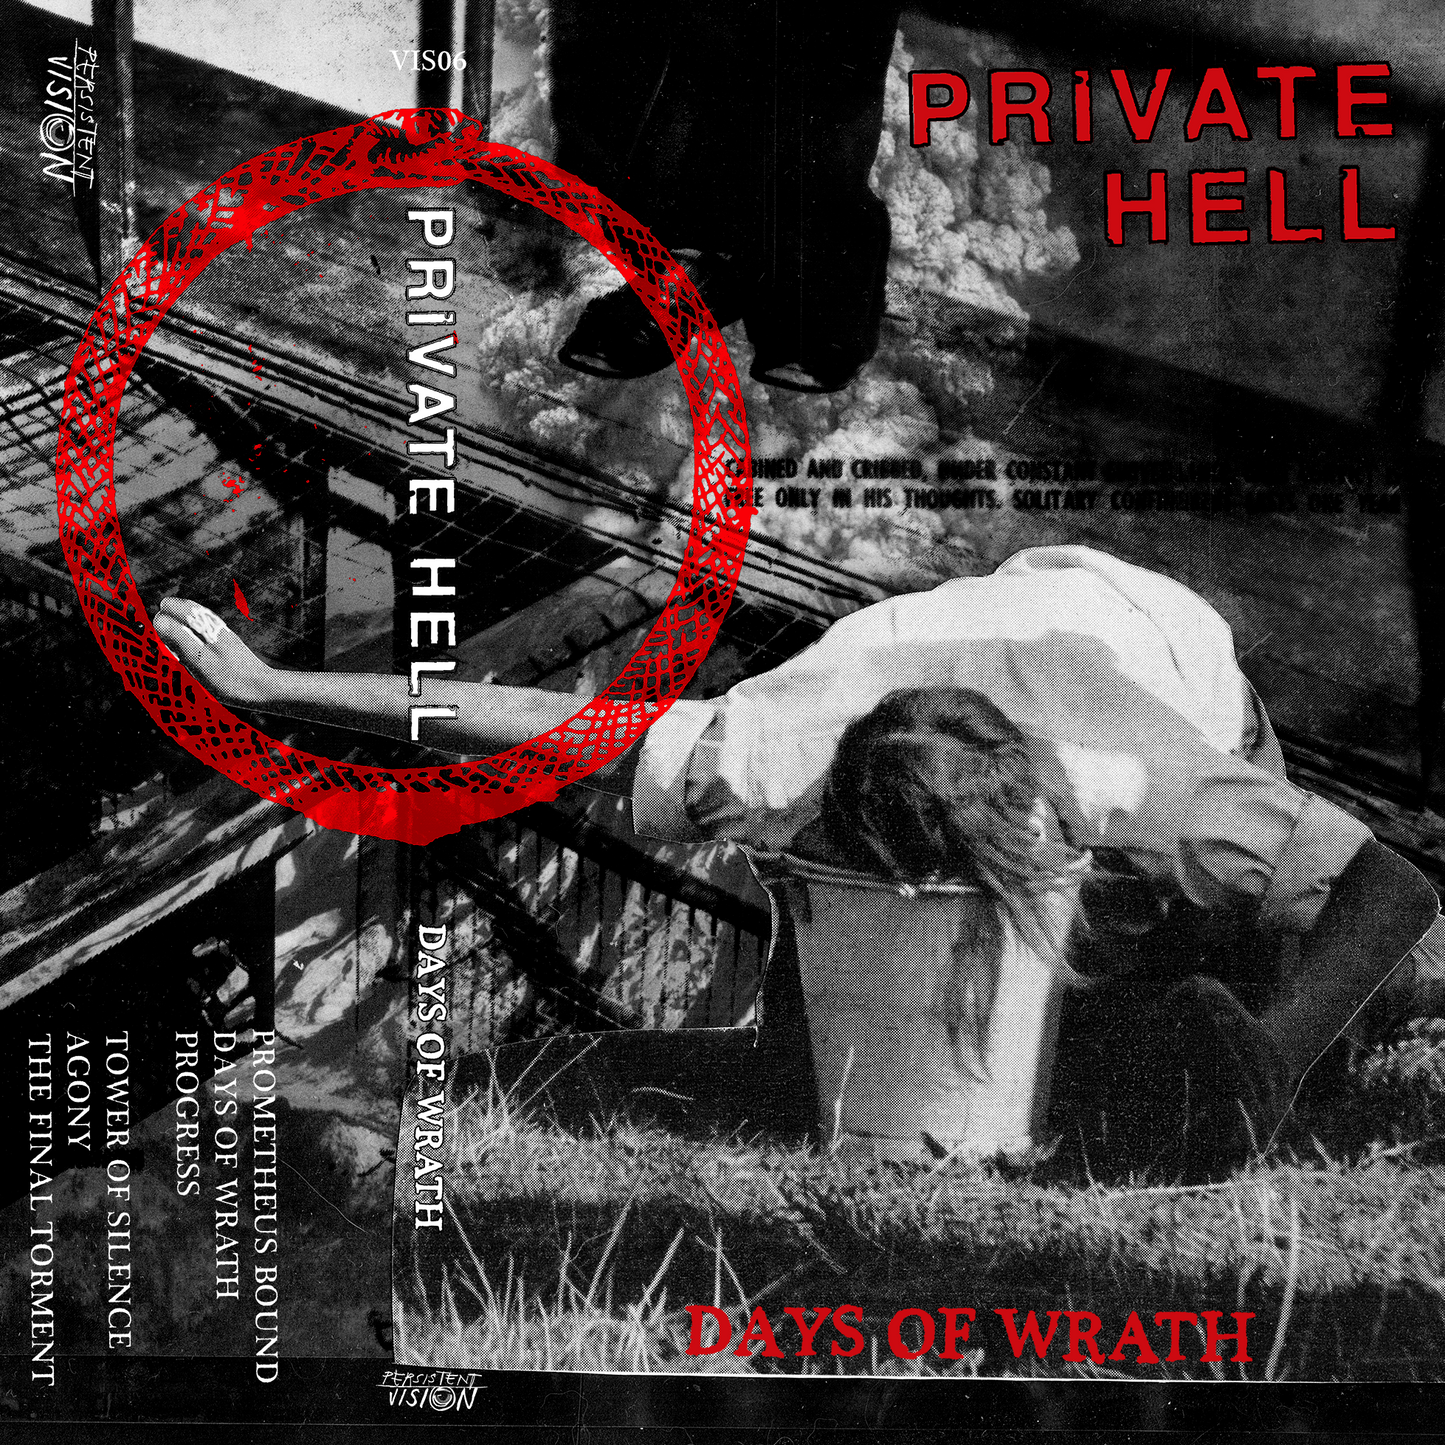 Private Hell "Days of Wrath" Cassette